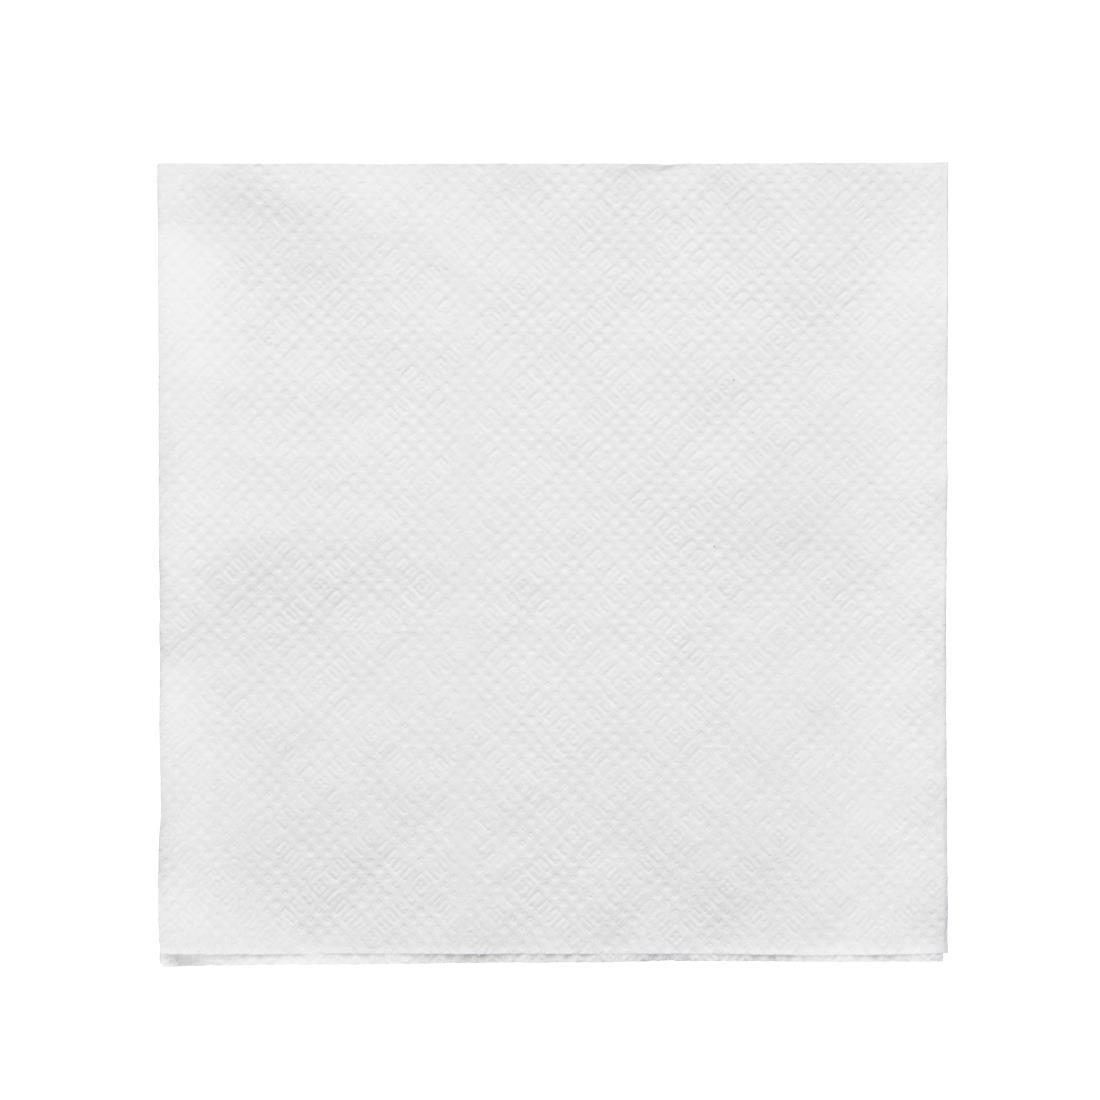 Fiesta Recyclable Cocktail Napkin White 24x24cm 1ply 1/4 Fold (Pack of 2000) - CM560  - 1